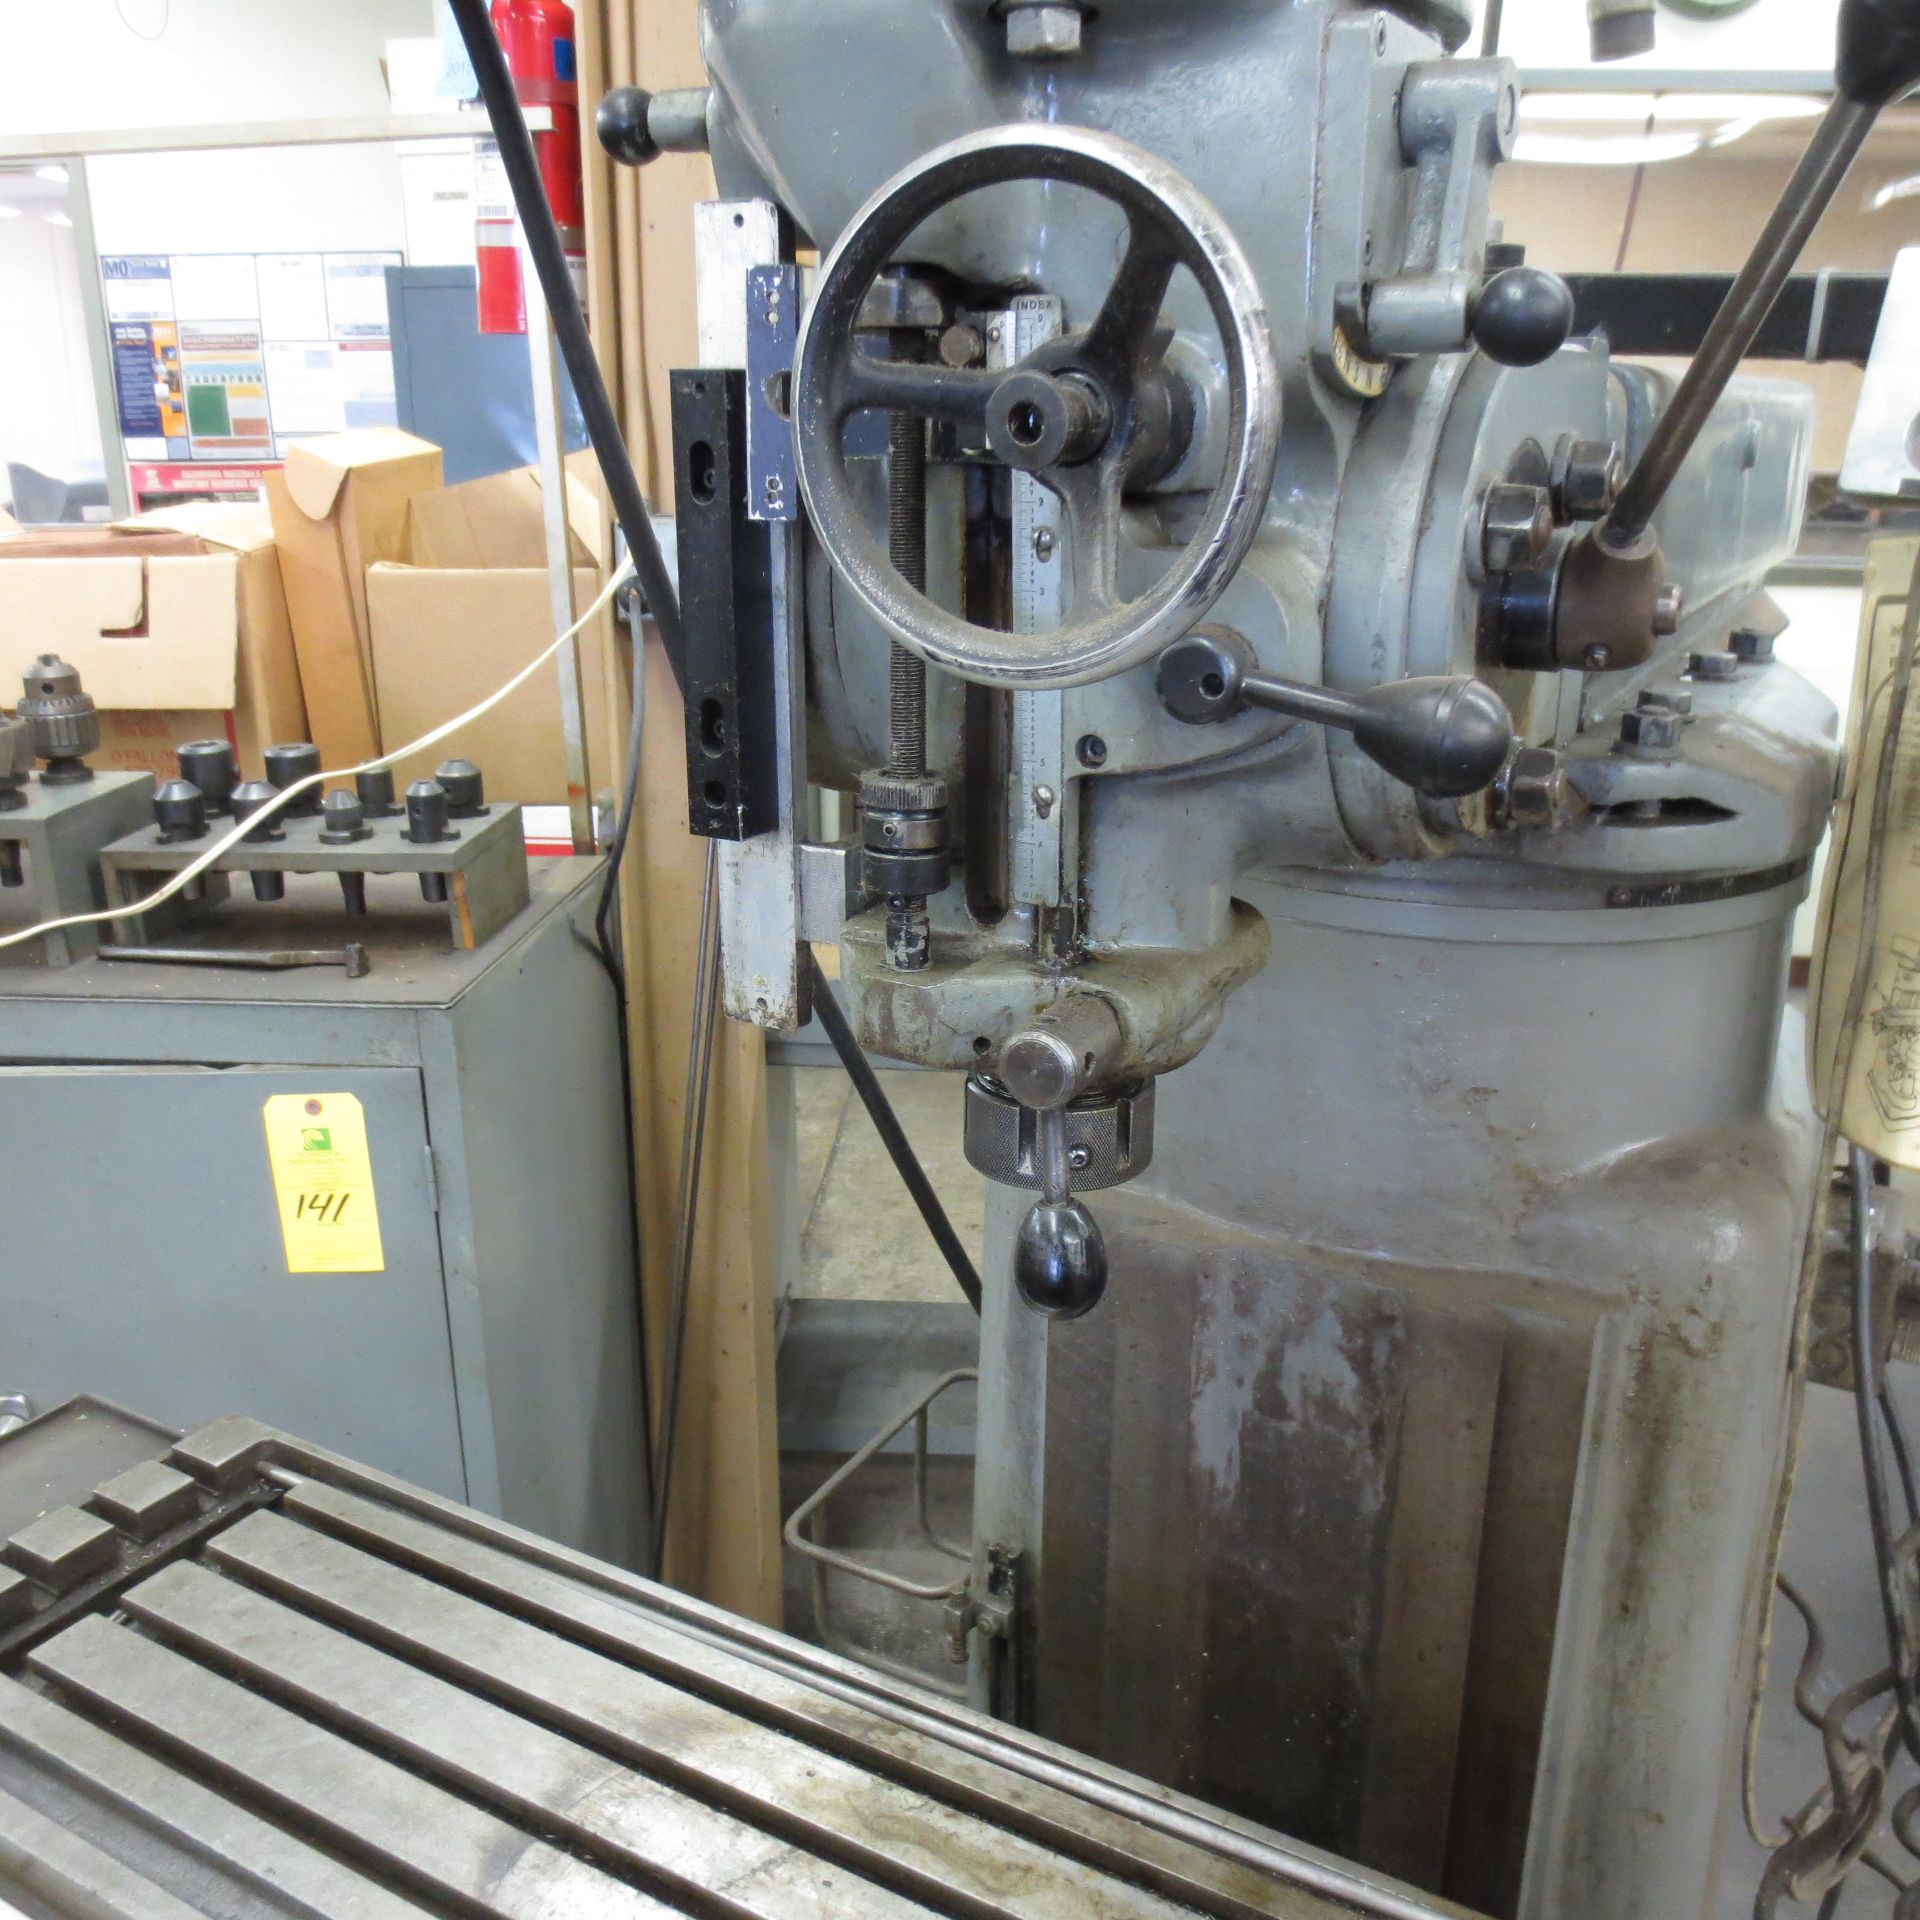 Wells Index Vertical Milling Machine, 50 to 4200 Spindle Speeds, 46" X 12" Table, Table Feed, Acu- - Image 4 of 4